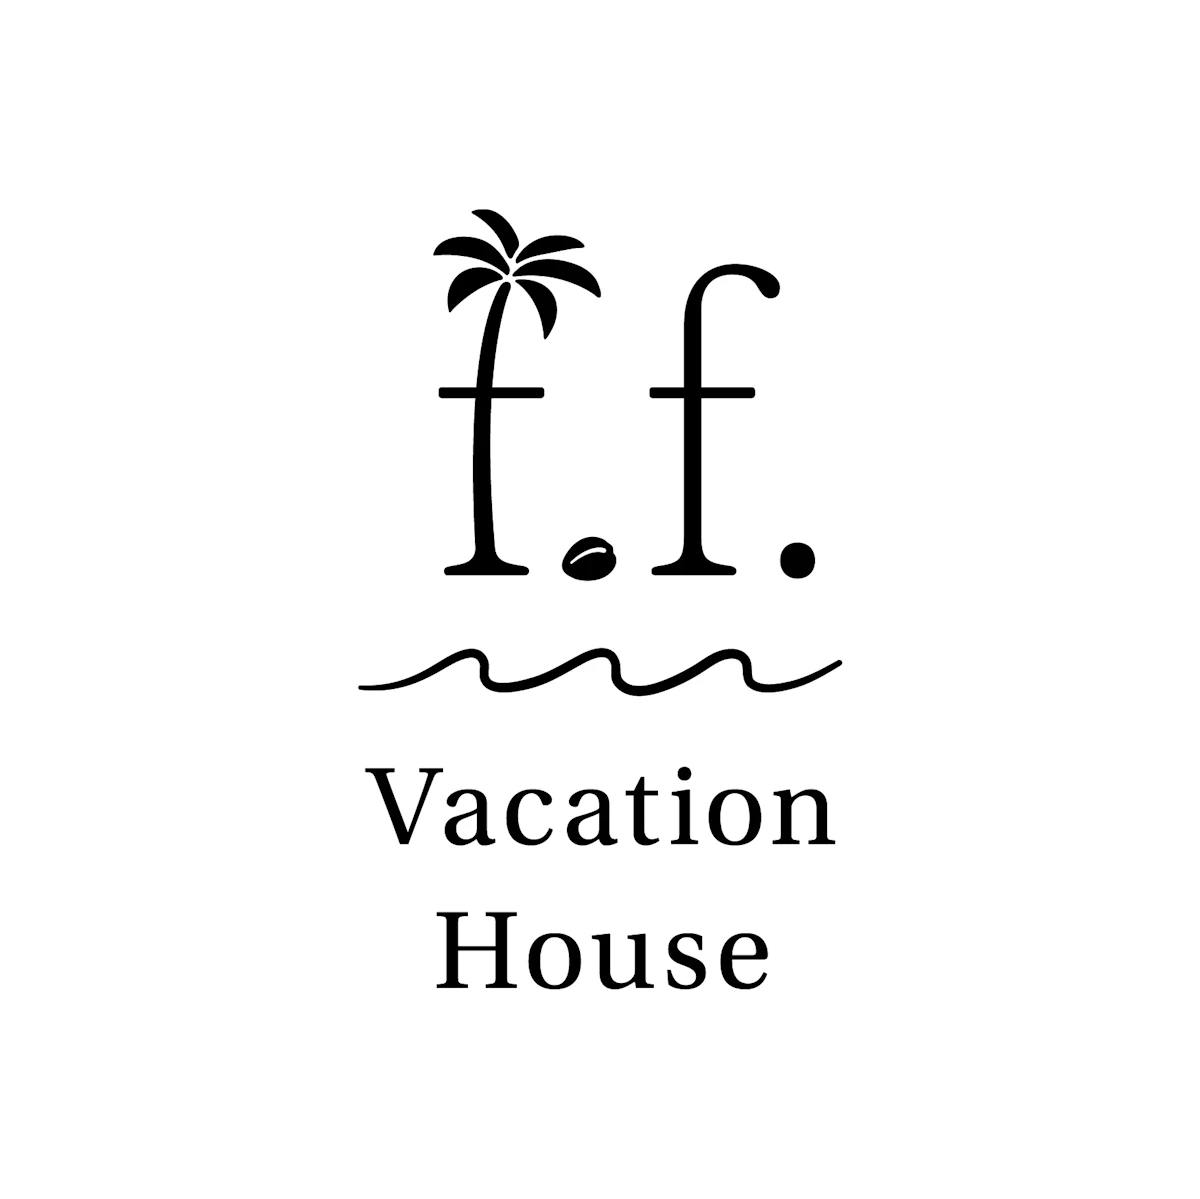 f.f. Vacation House ロゴ